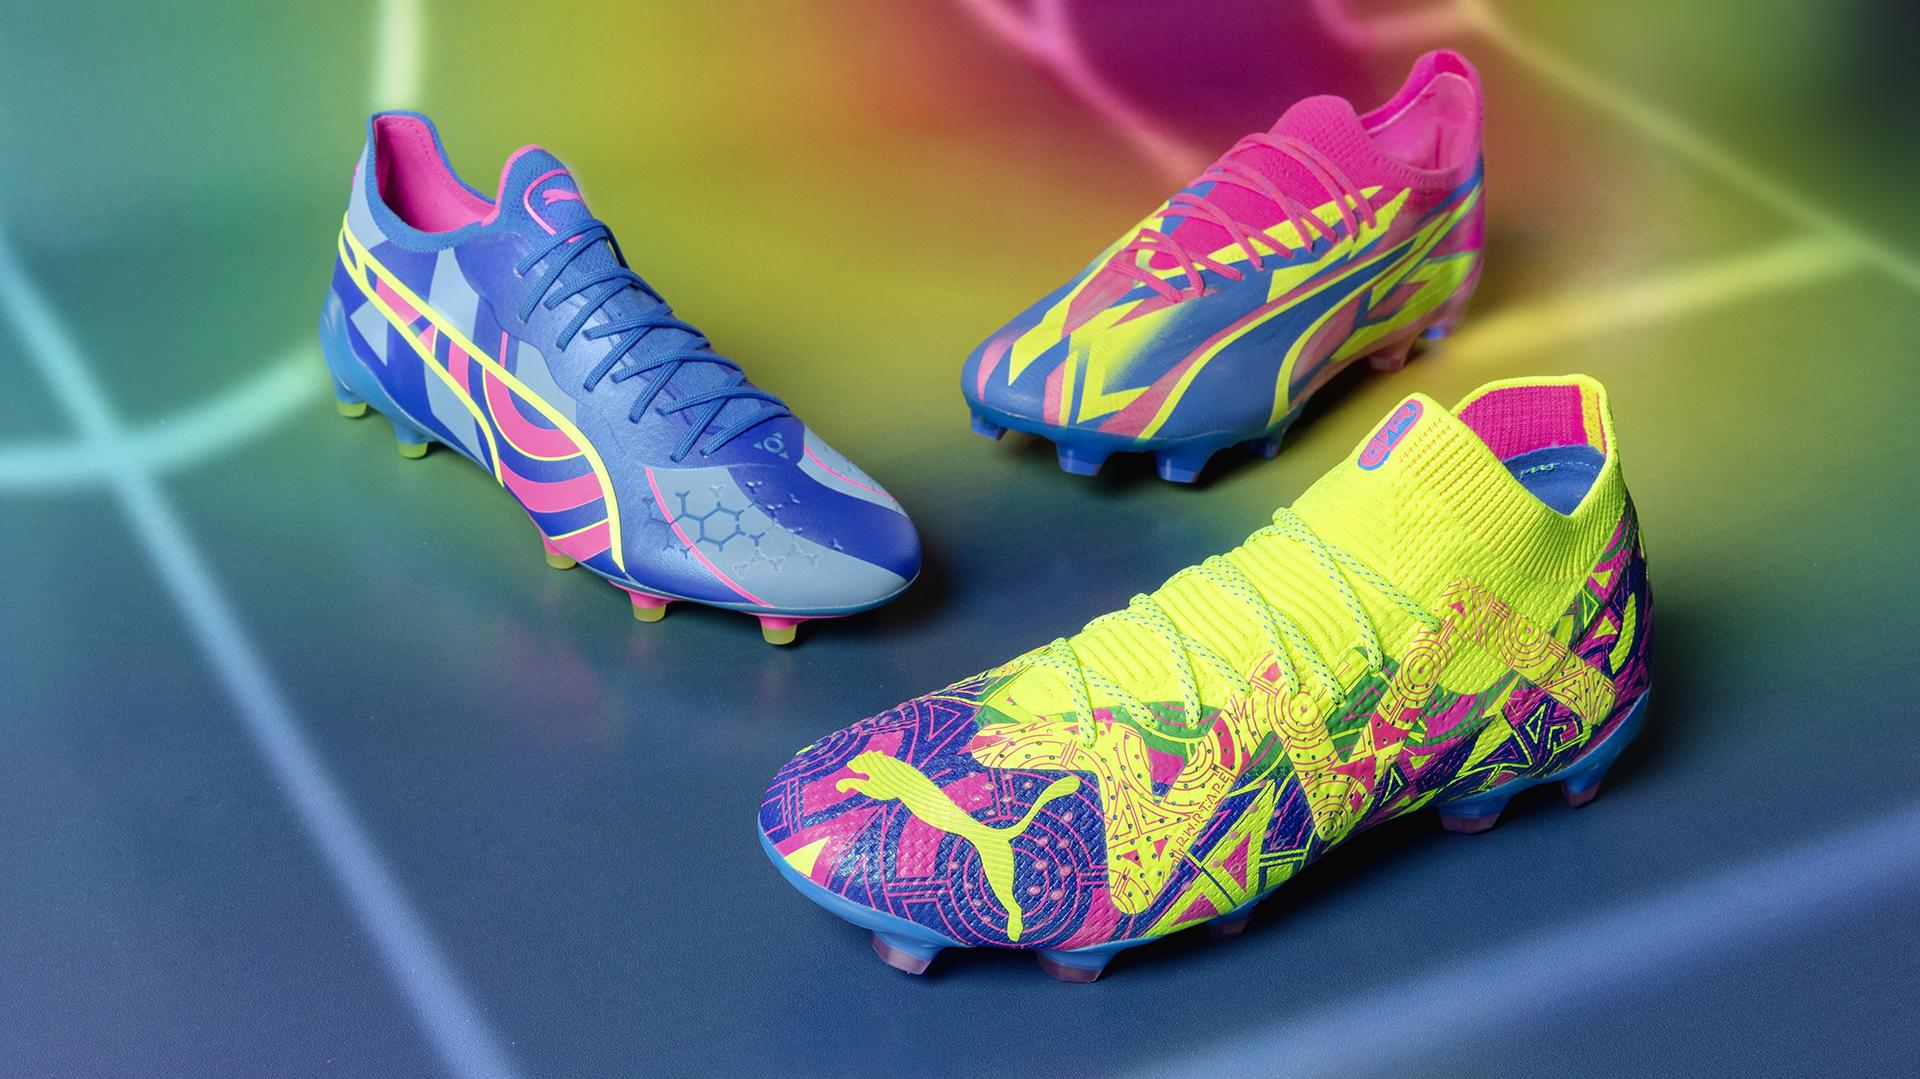 Free download PUMAs New Energy Boot Pack is for the Next Generation ...